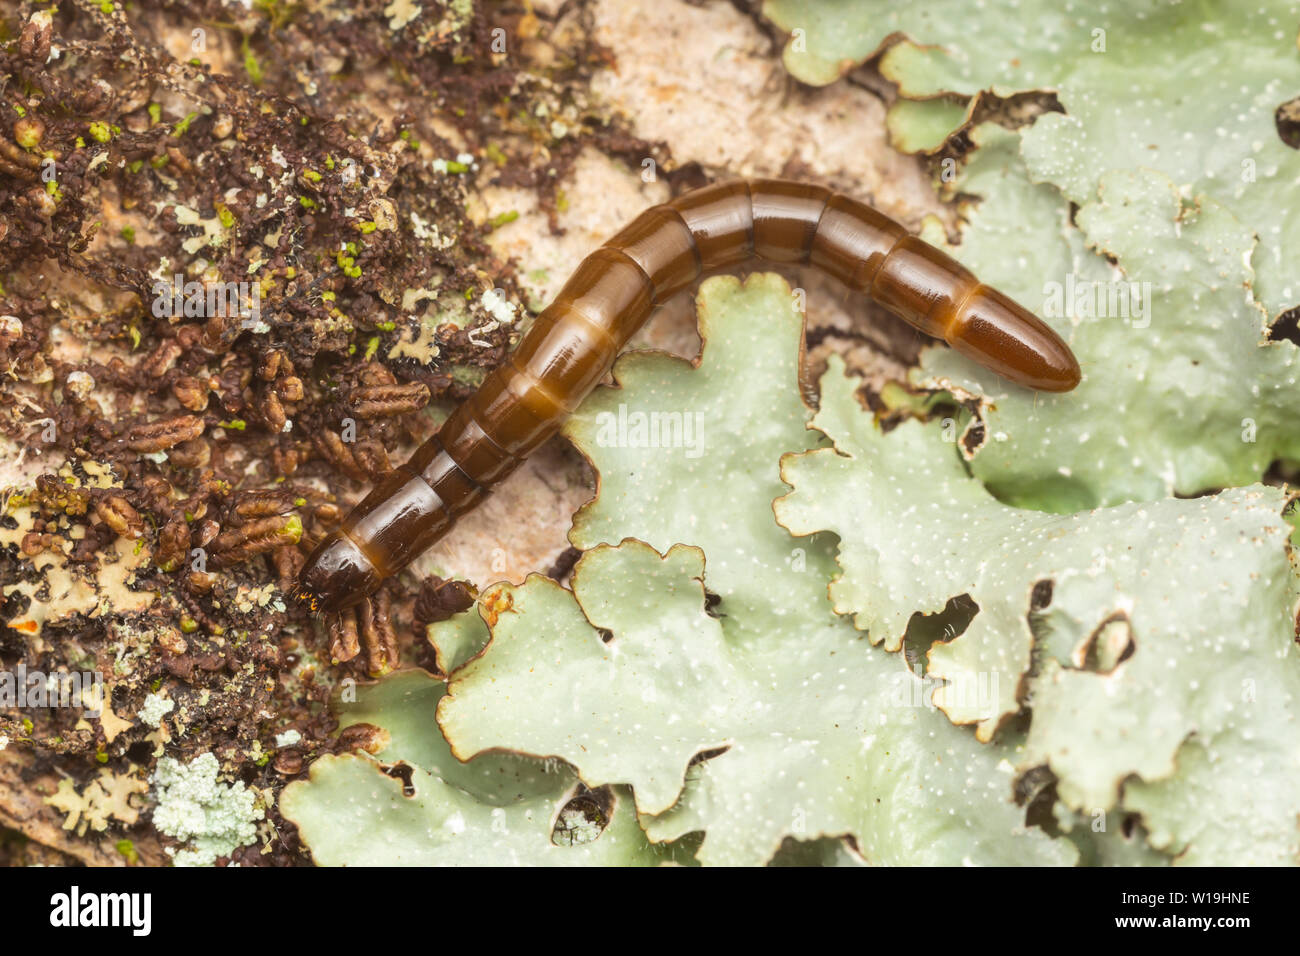 A Darkling Beetle (Tenebrionidae) larva crawls on the side of a lichen covered tree. Stock Photo